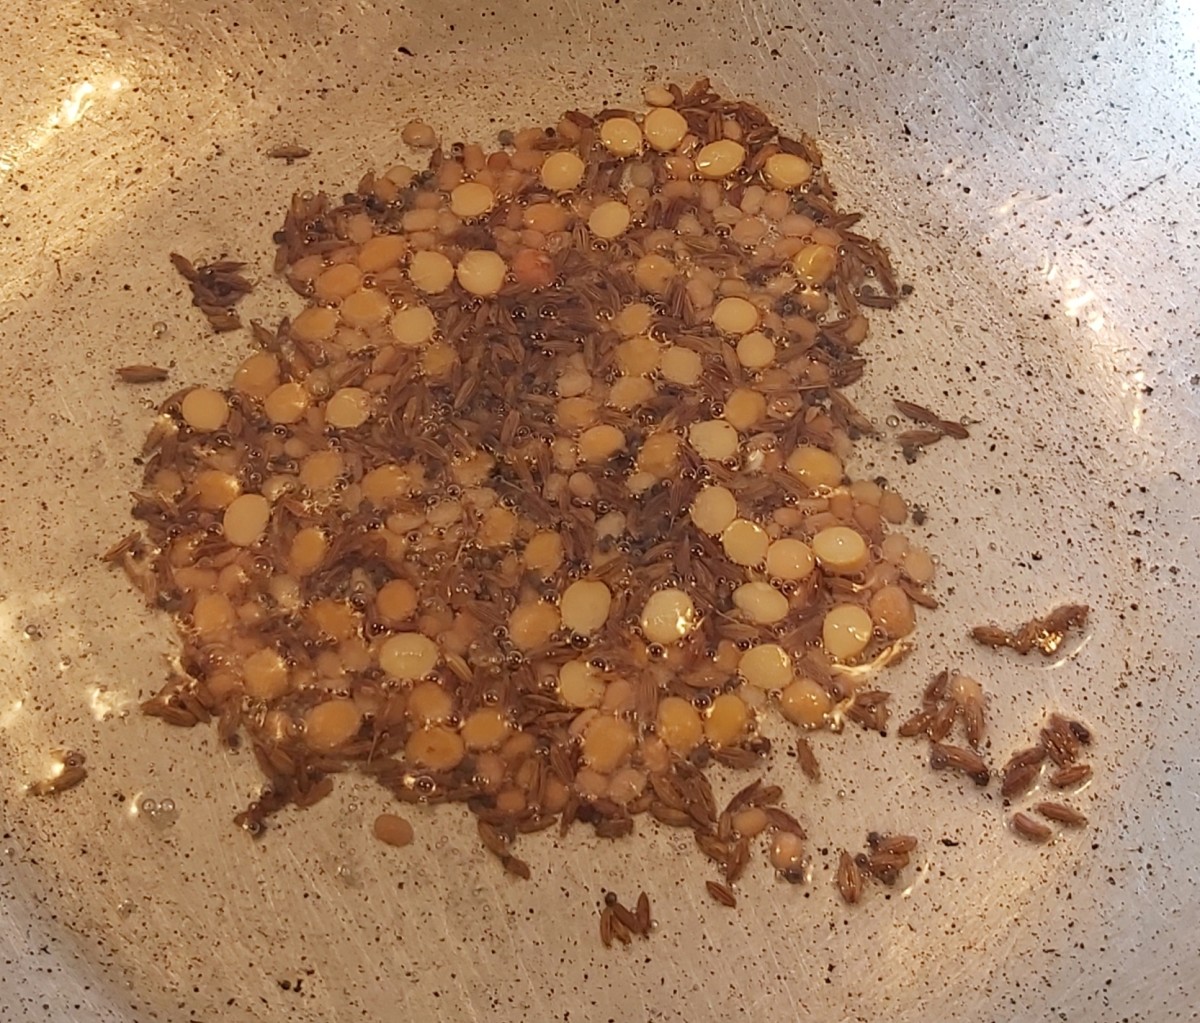 Fry the lentils over low flame till golden brown (take care not to burn the lentils).